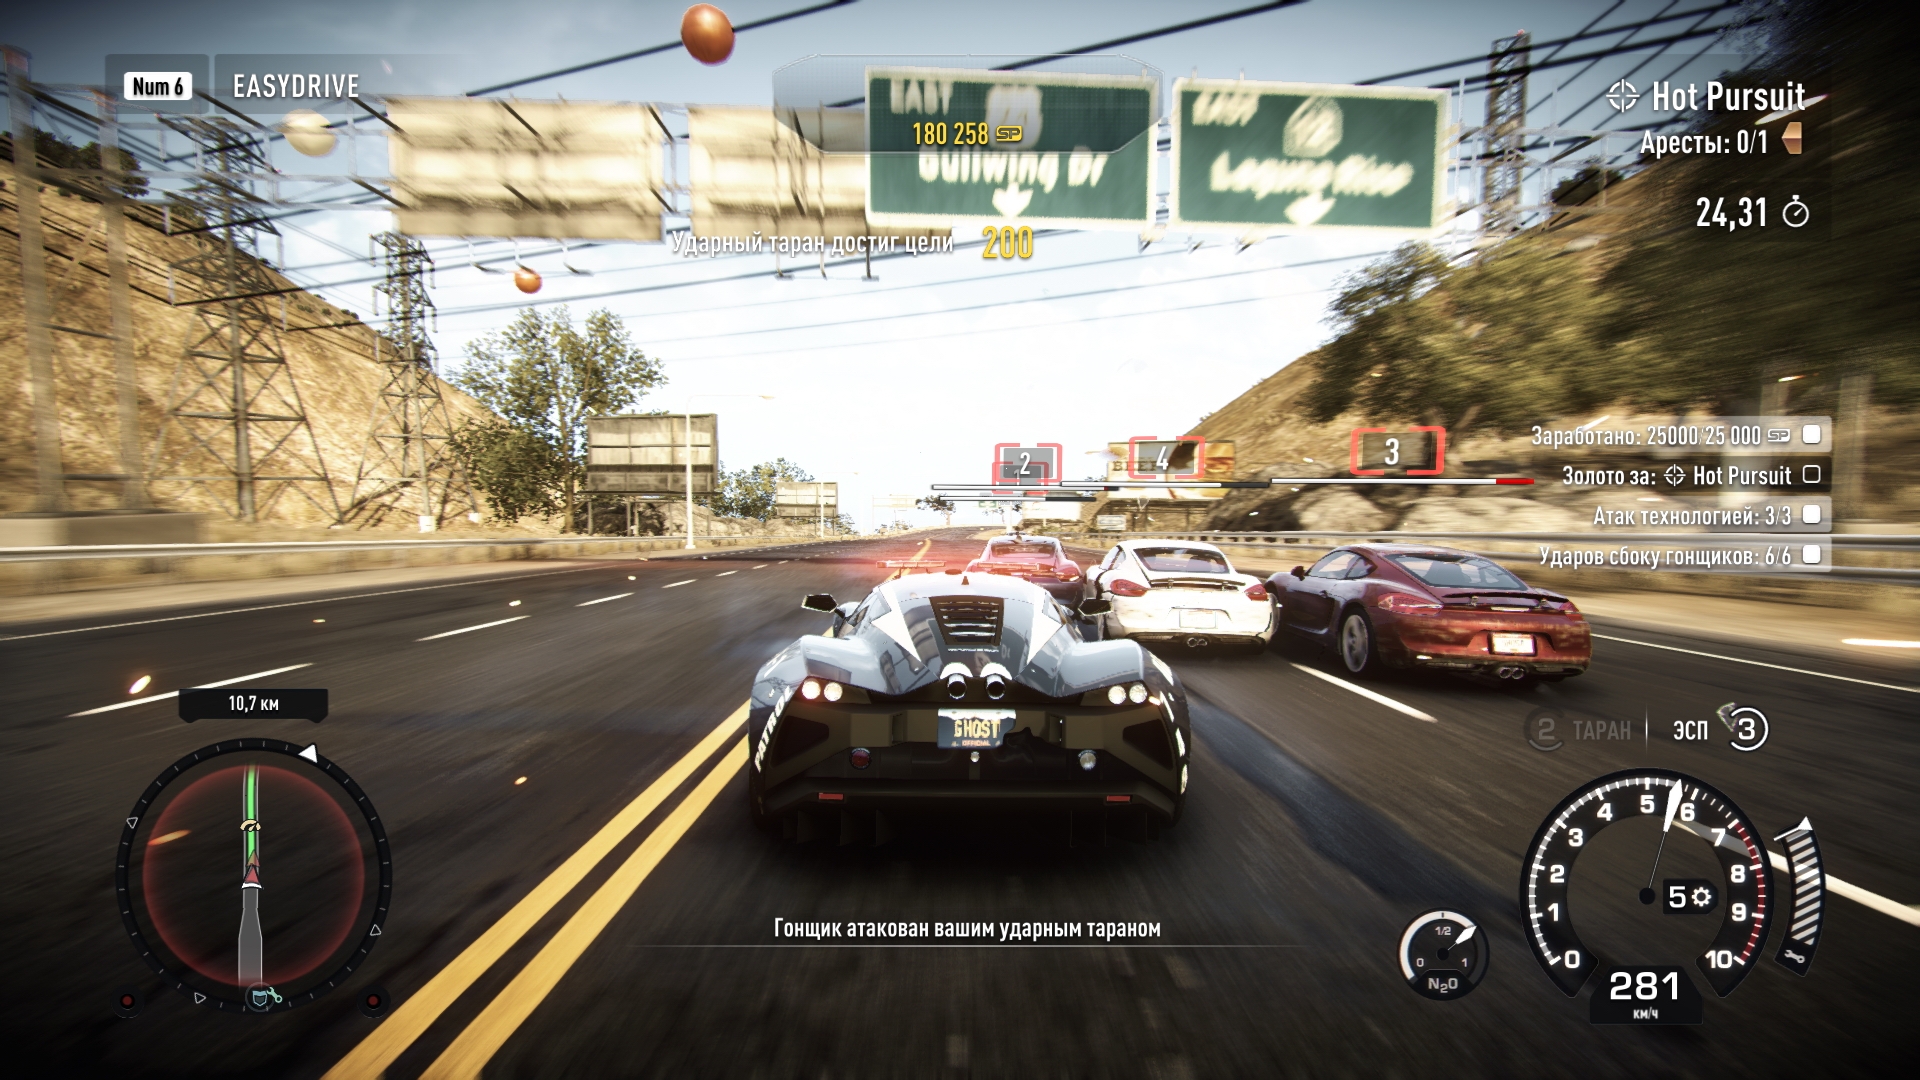 Need for Speed: Rivals - PlayStation 4